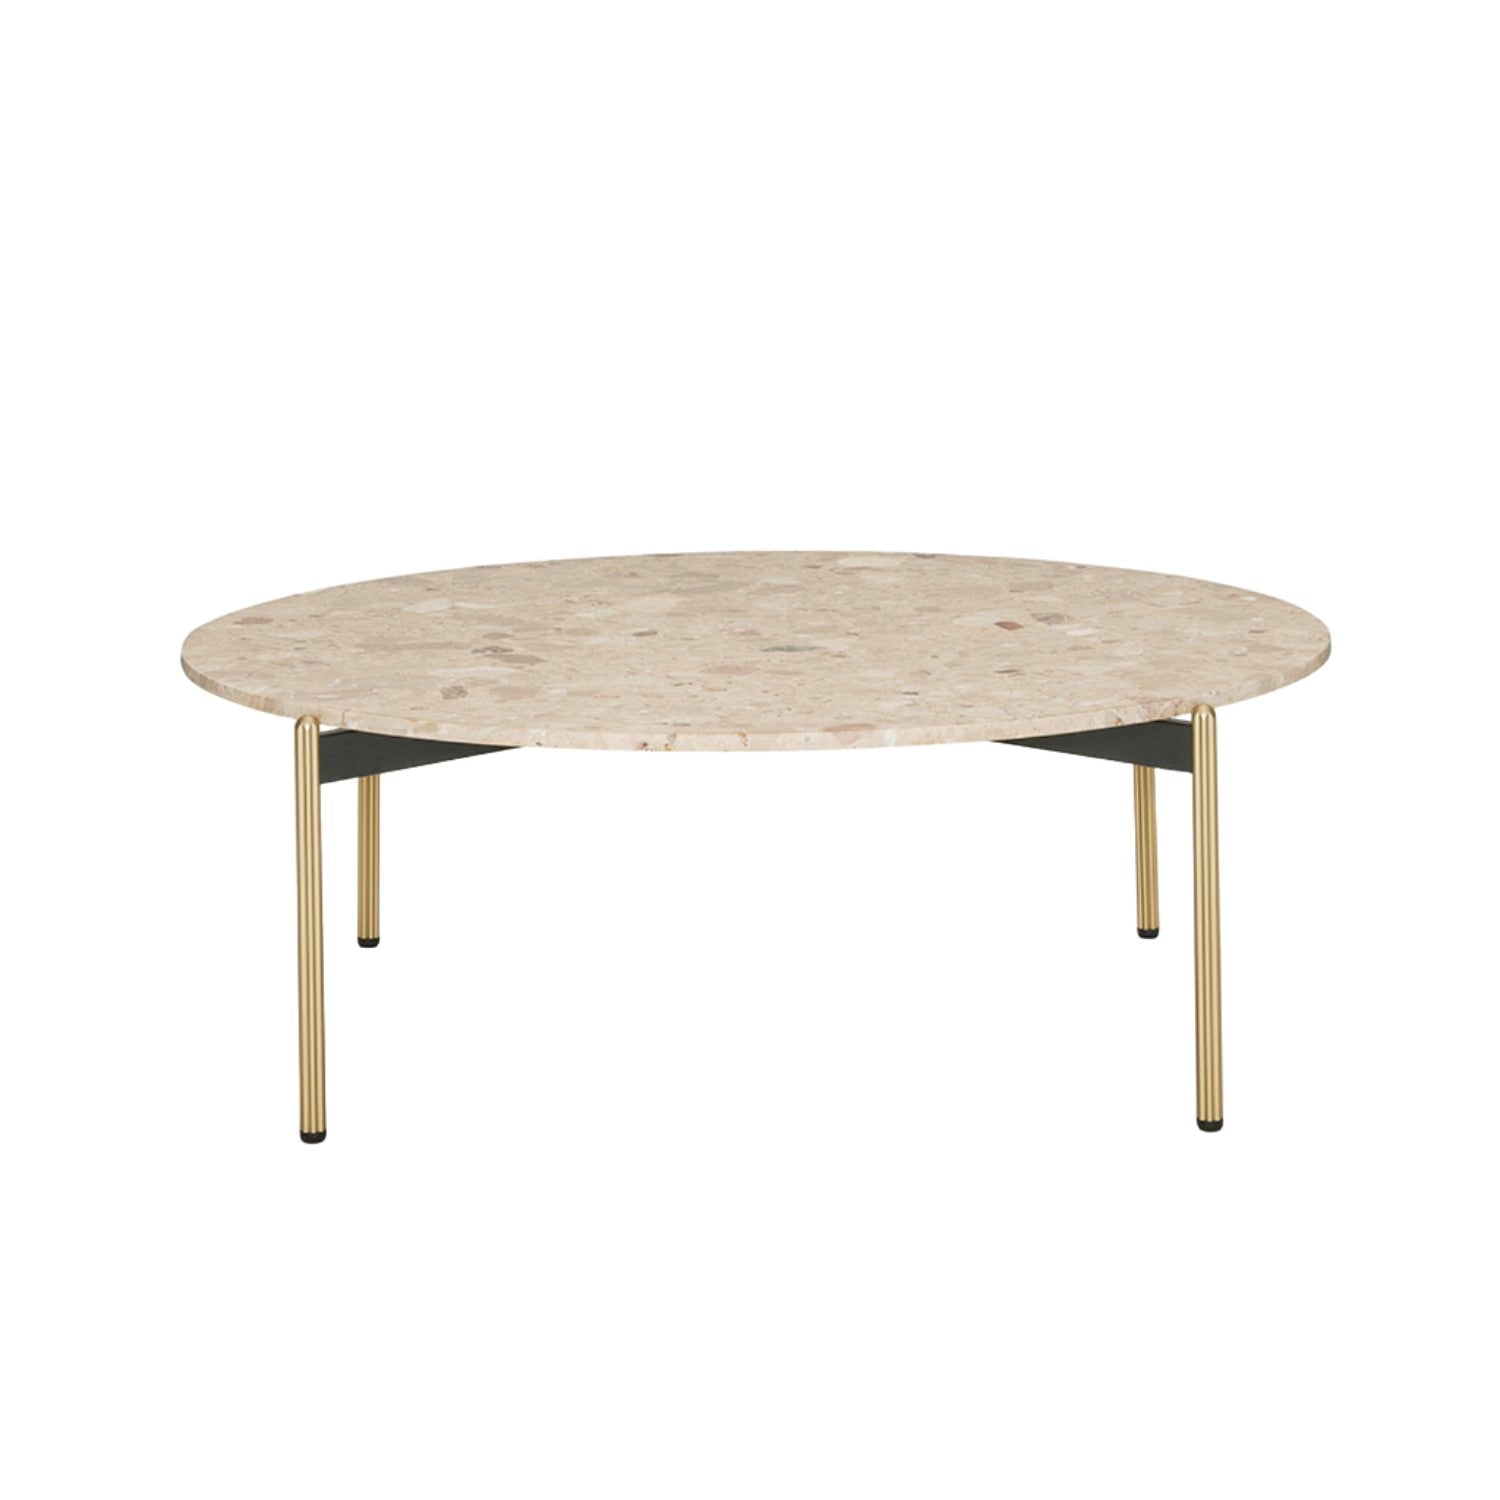 Pedrali Blume round coffee side table in composite marble and brass legs